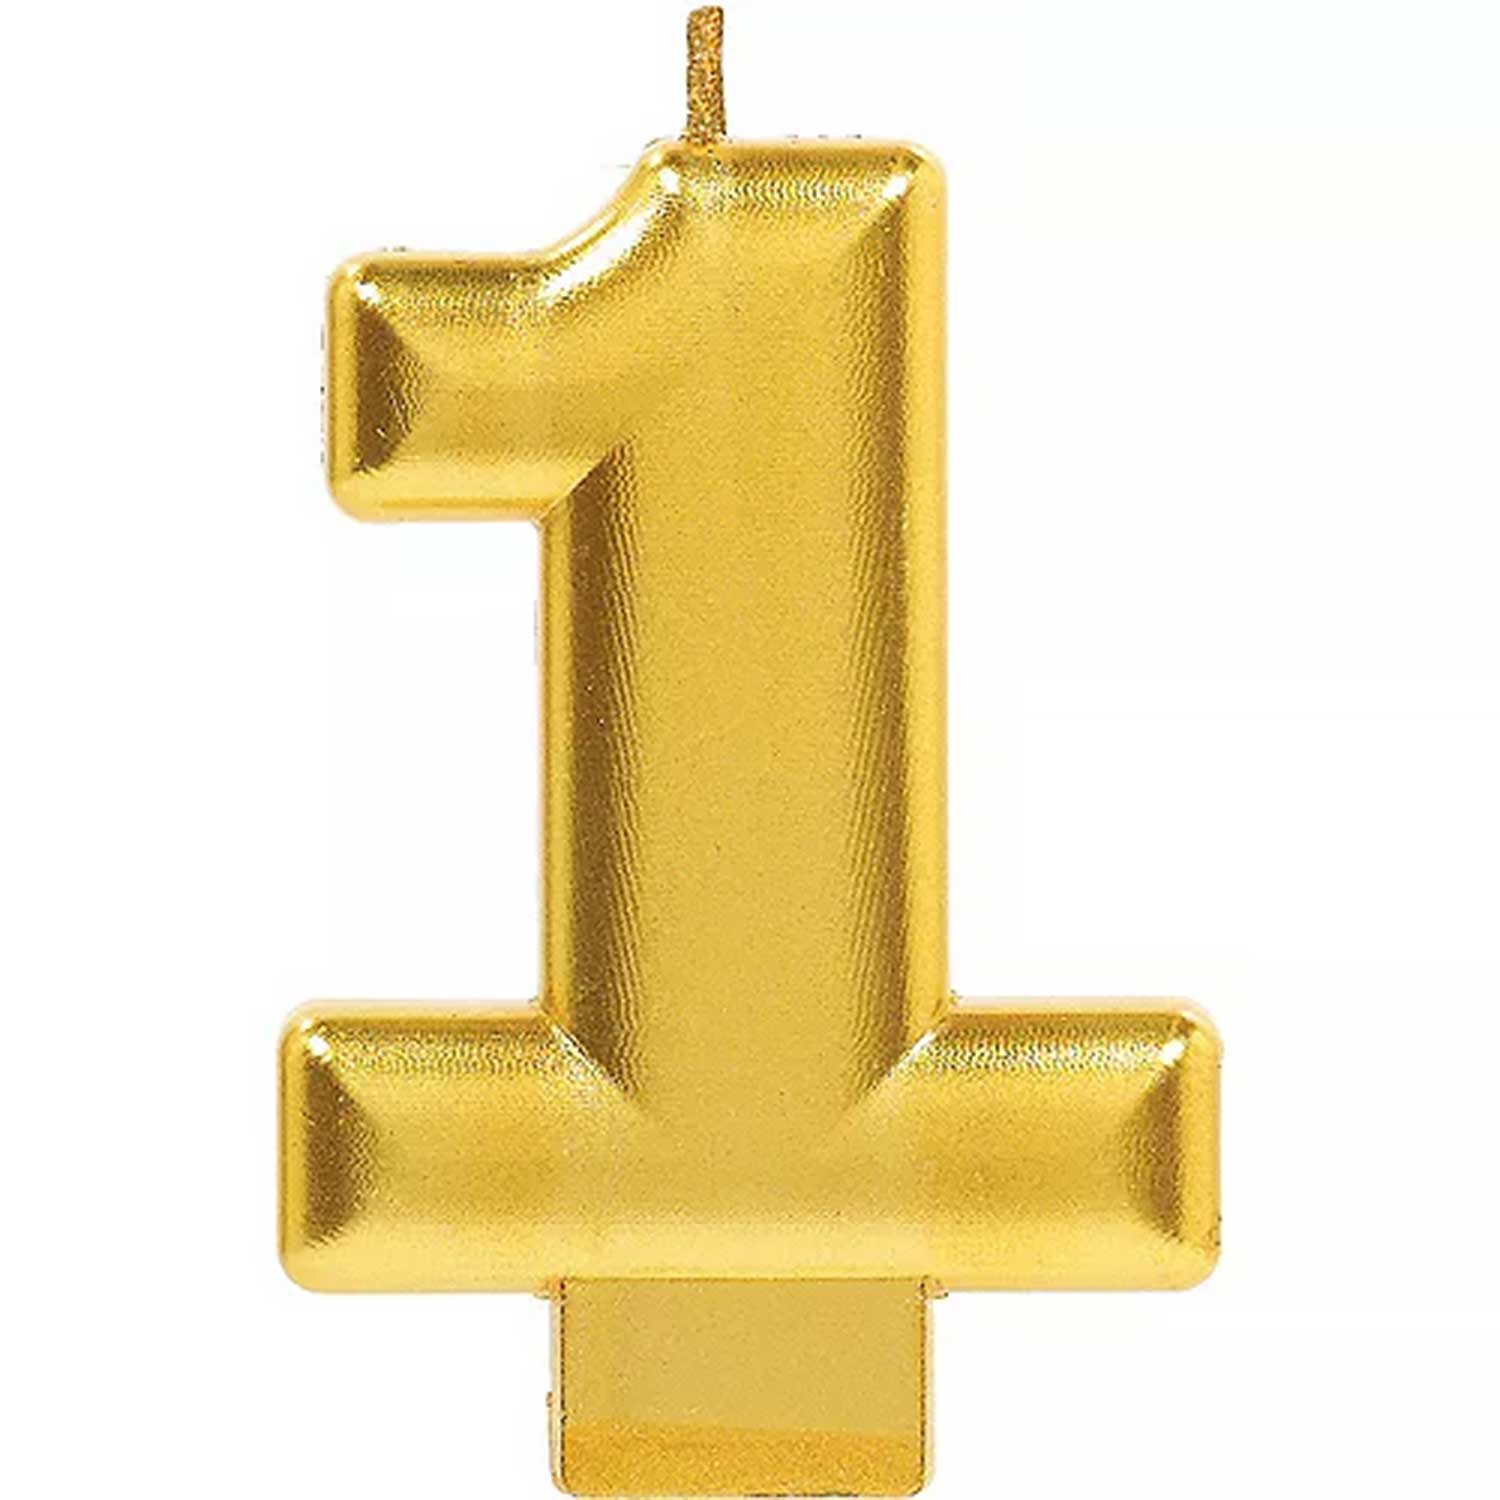 Gold Number 1 Candle